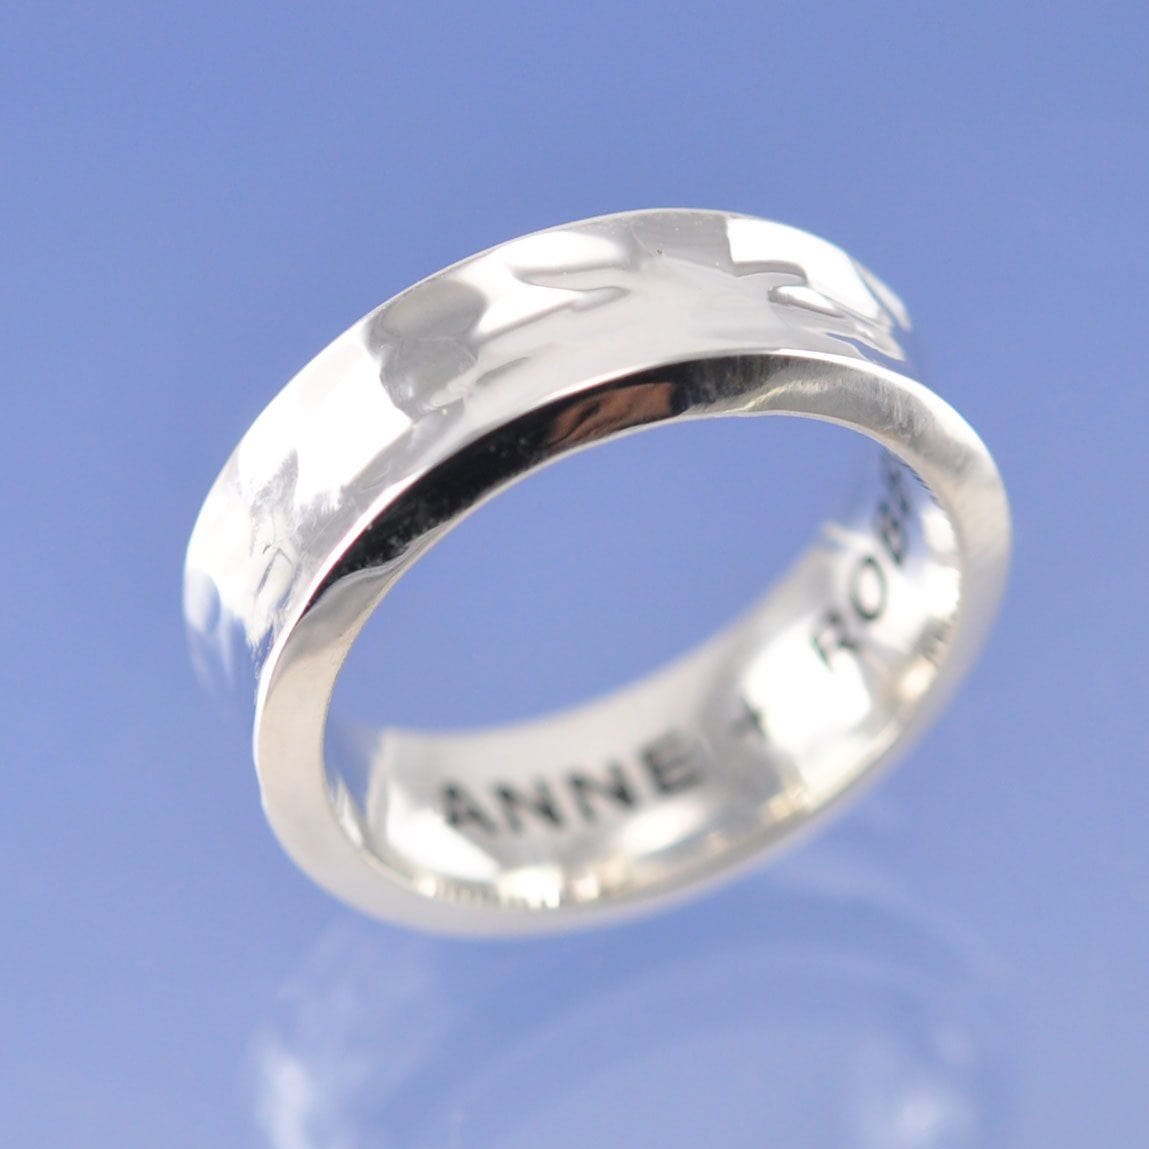 Anti-Clastic Hammered Ring with Cremation Ashes Ring by Chris Parry Jewellery